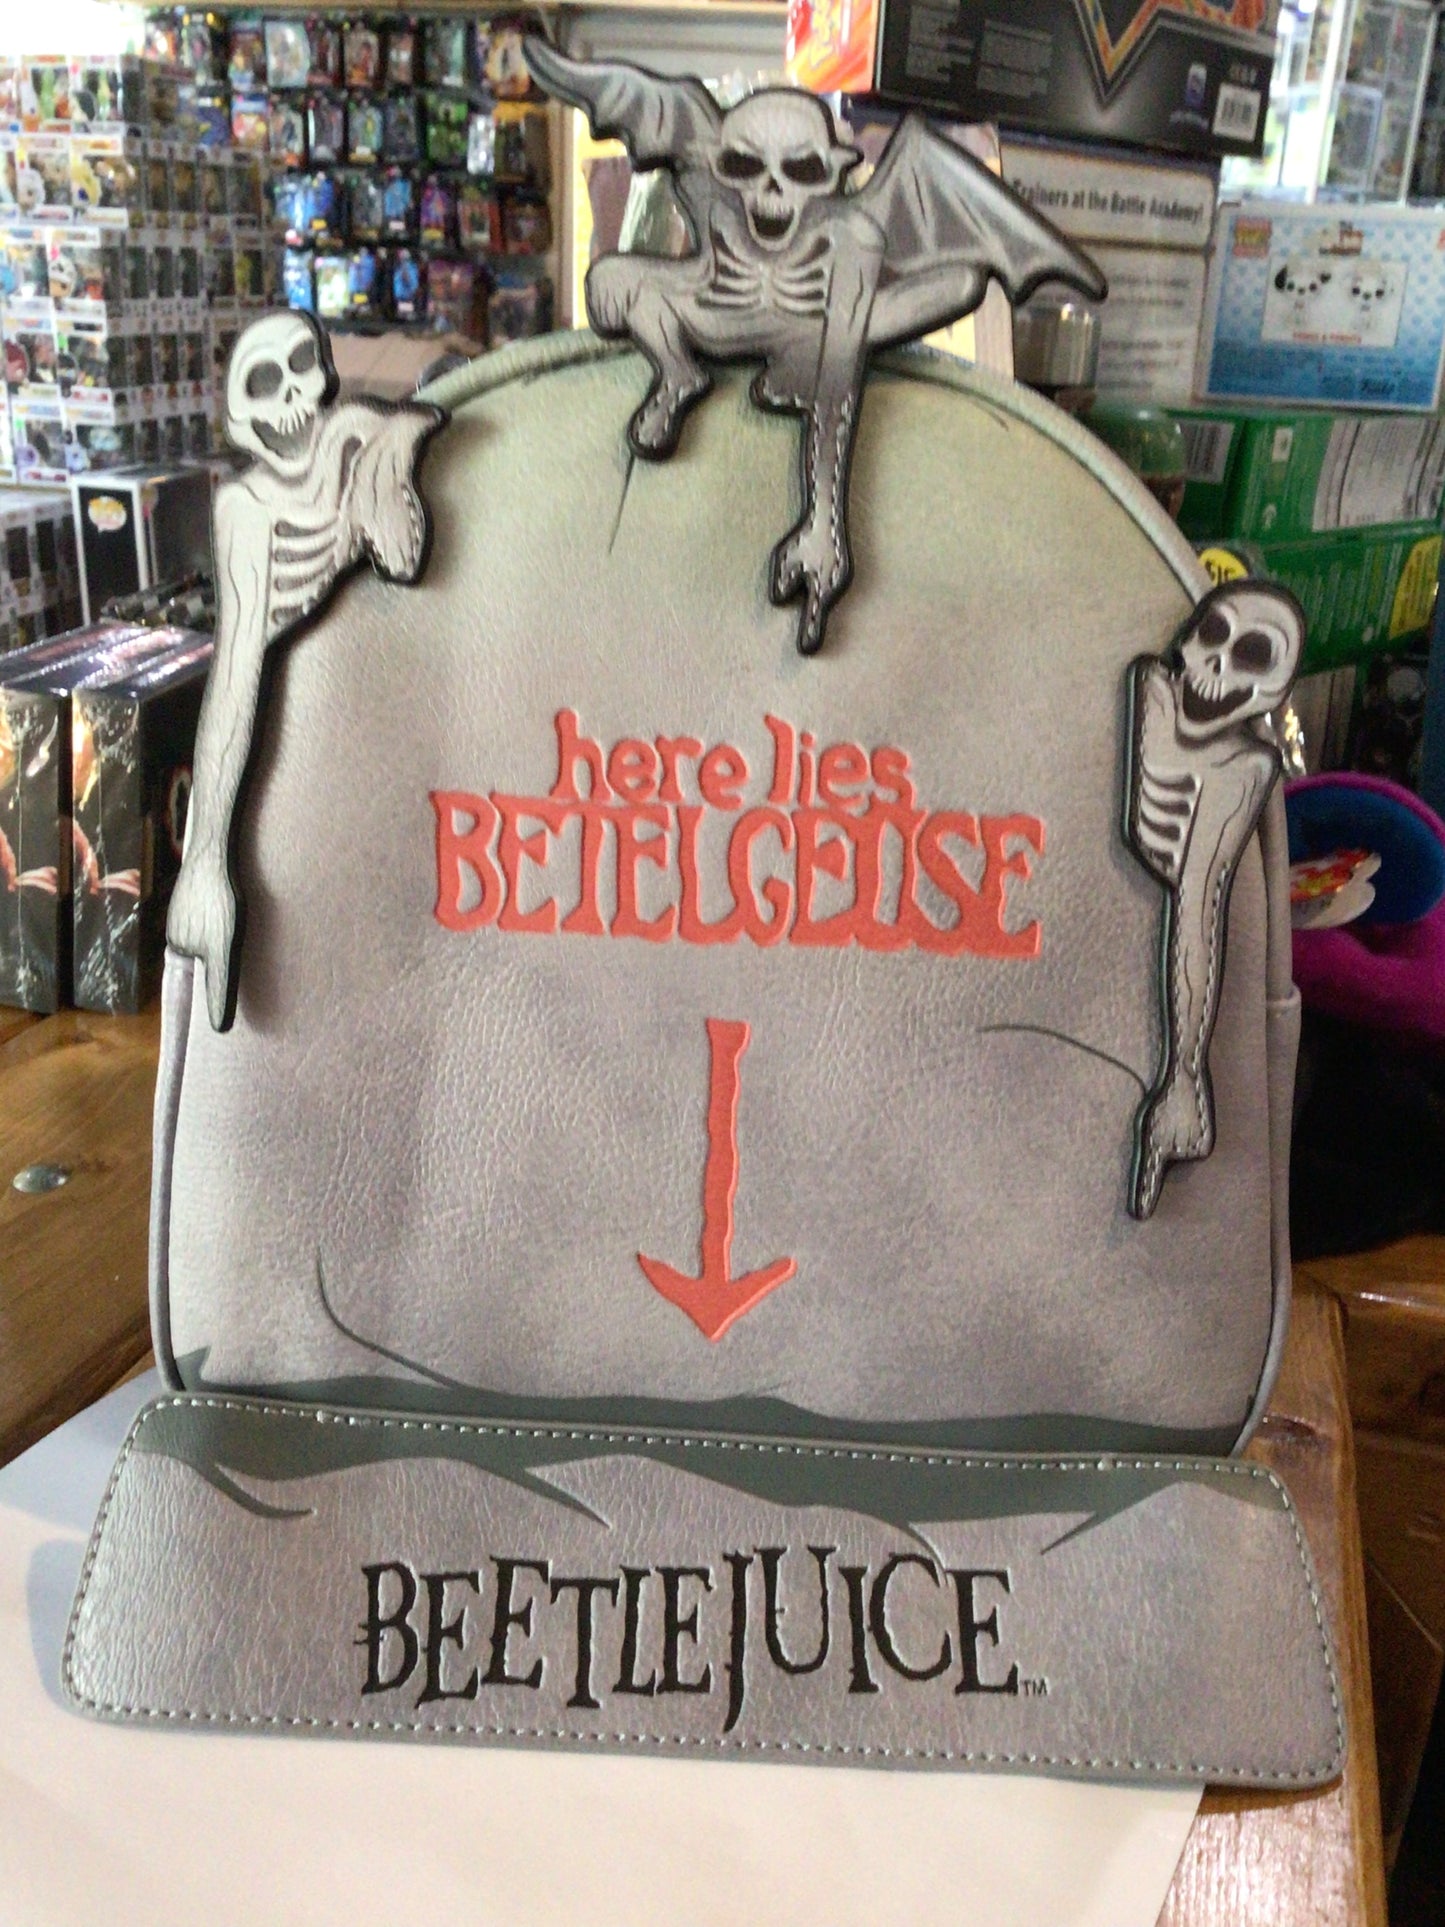 Beetlejuice Tombstone mini backpack by Loungefly